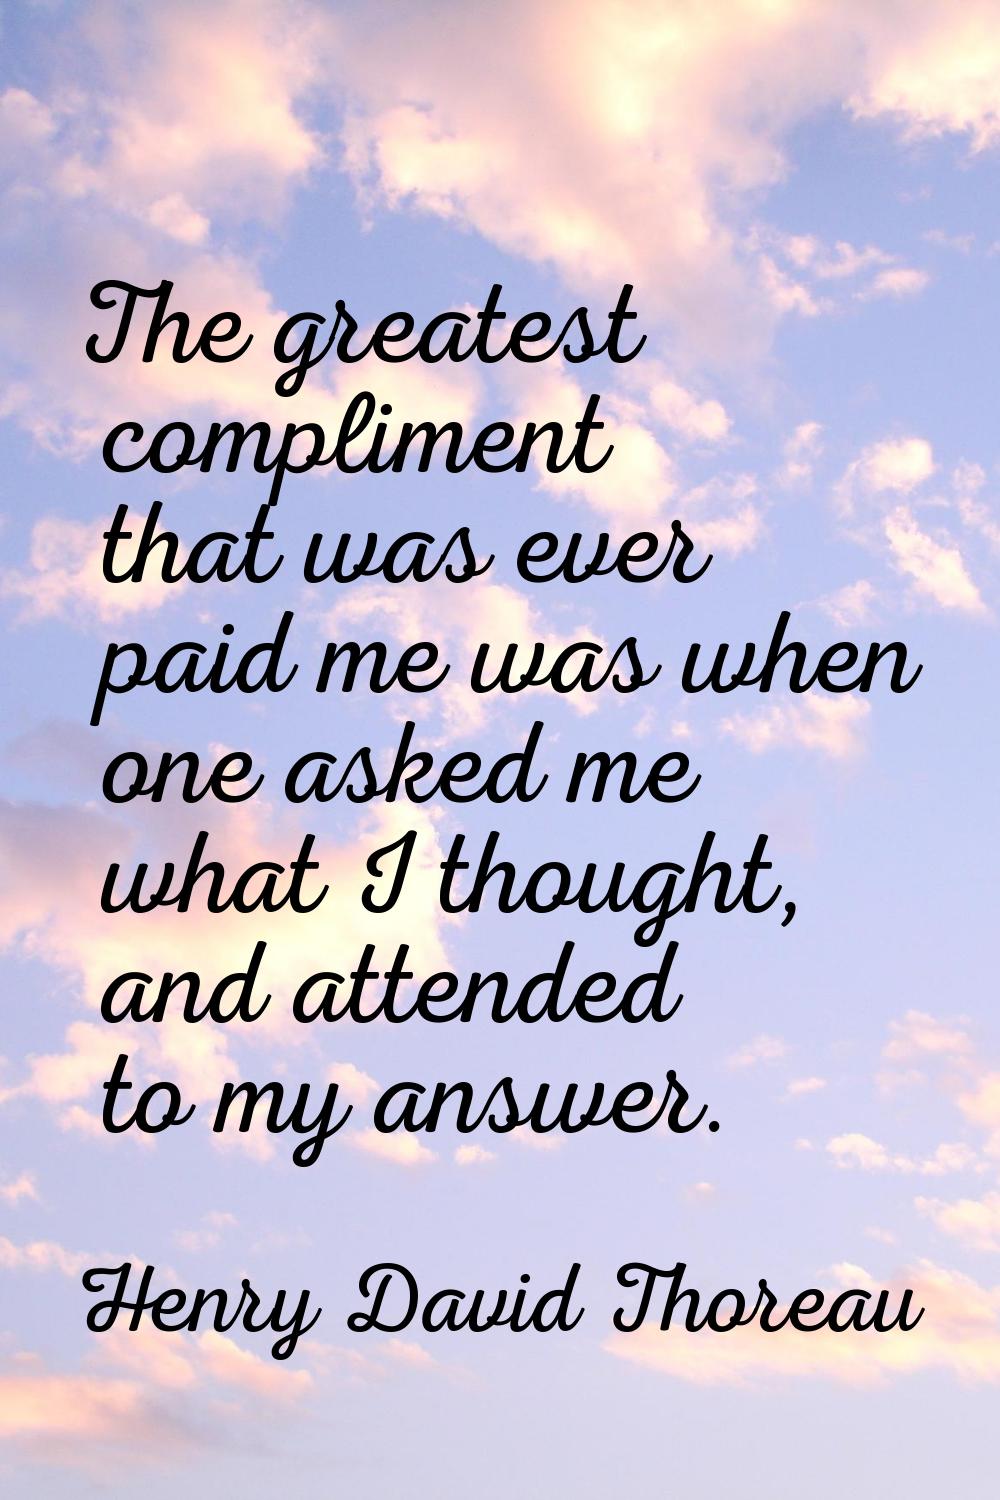 The greatest compliment that was ever paid me was when one asked me what I thought, and attended to